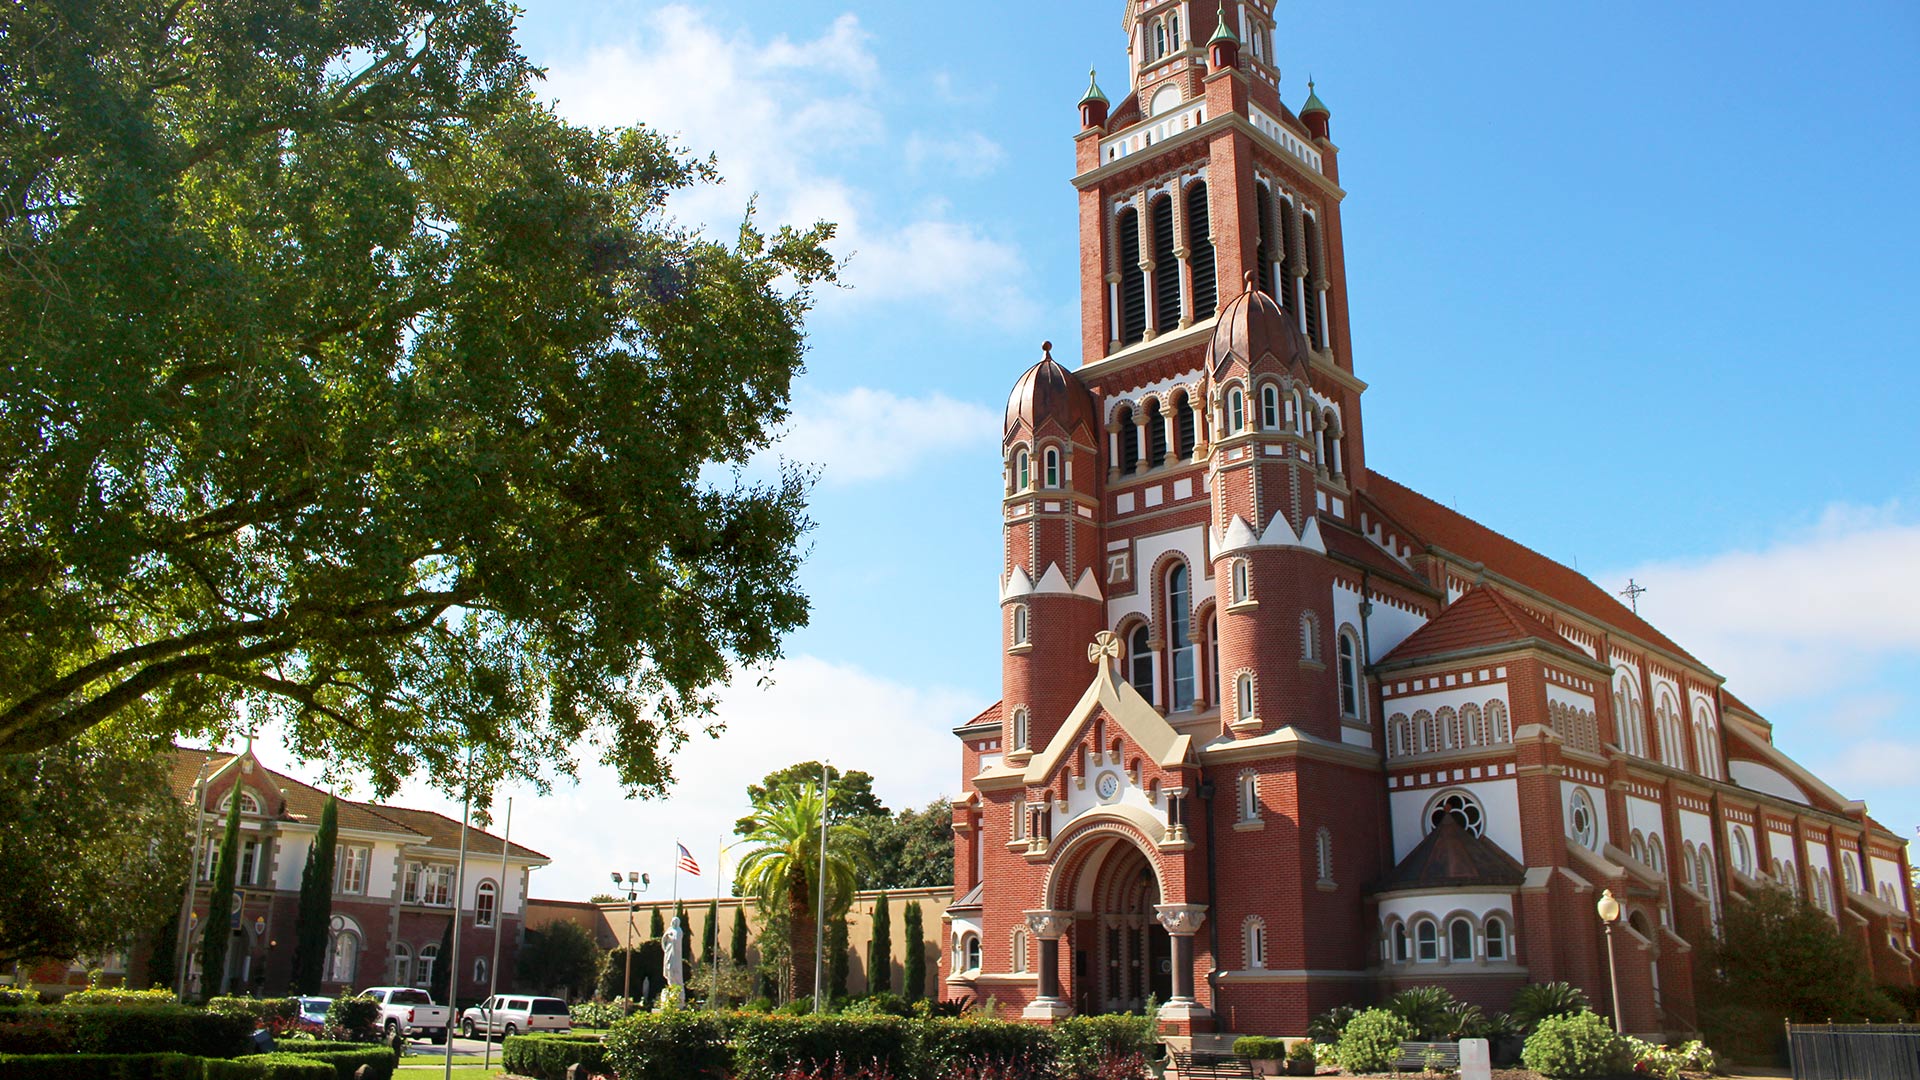 Cathedral of St. John the Evangelist in Lafayette